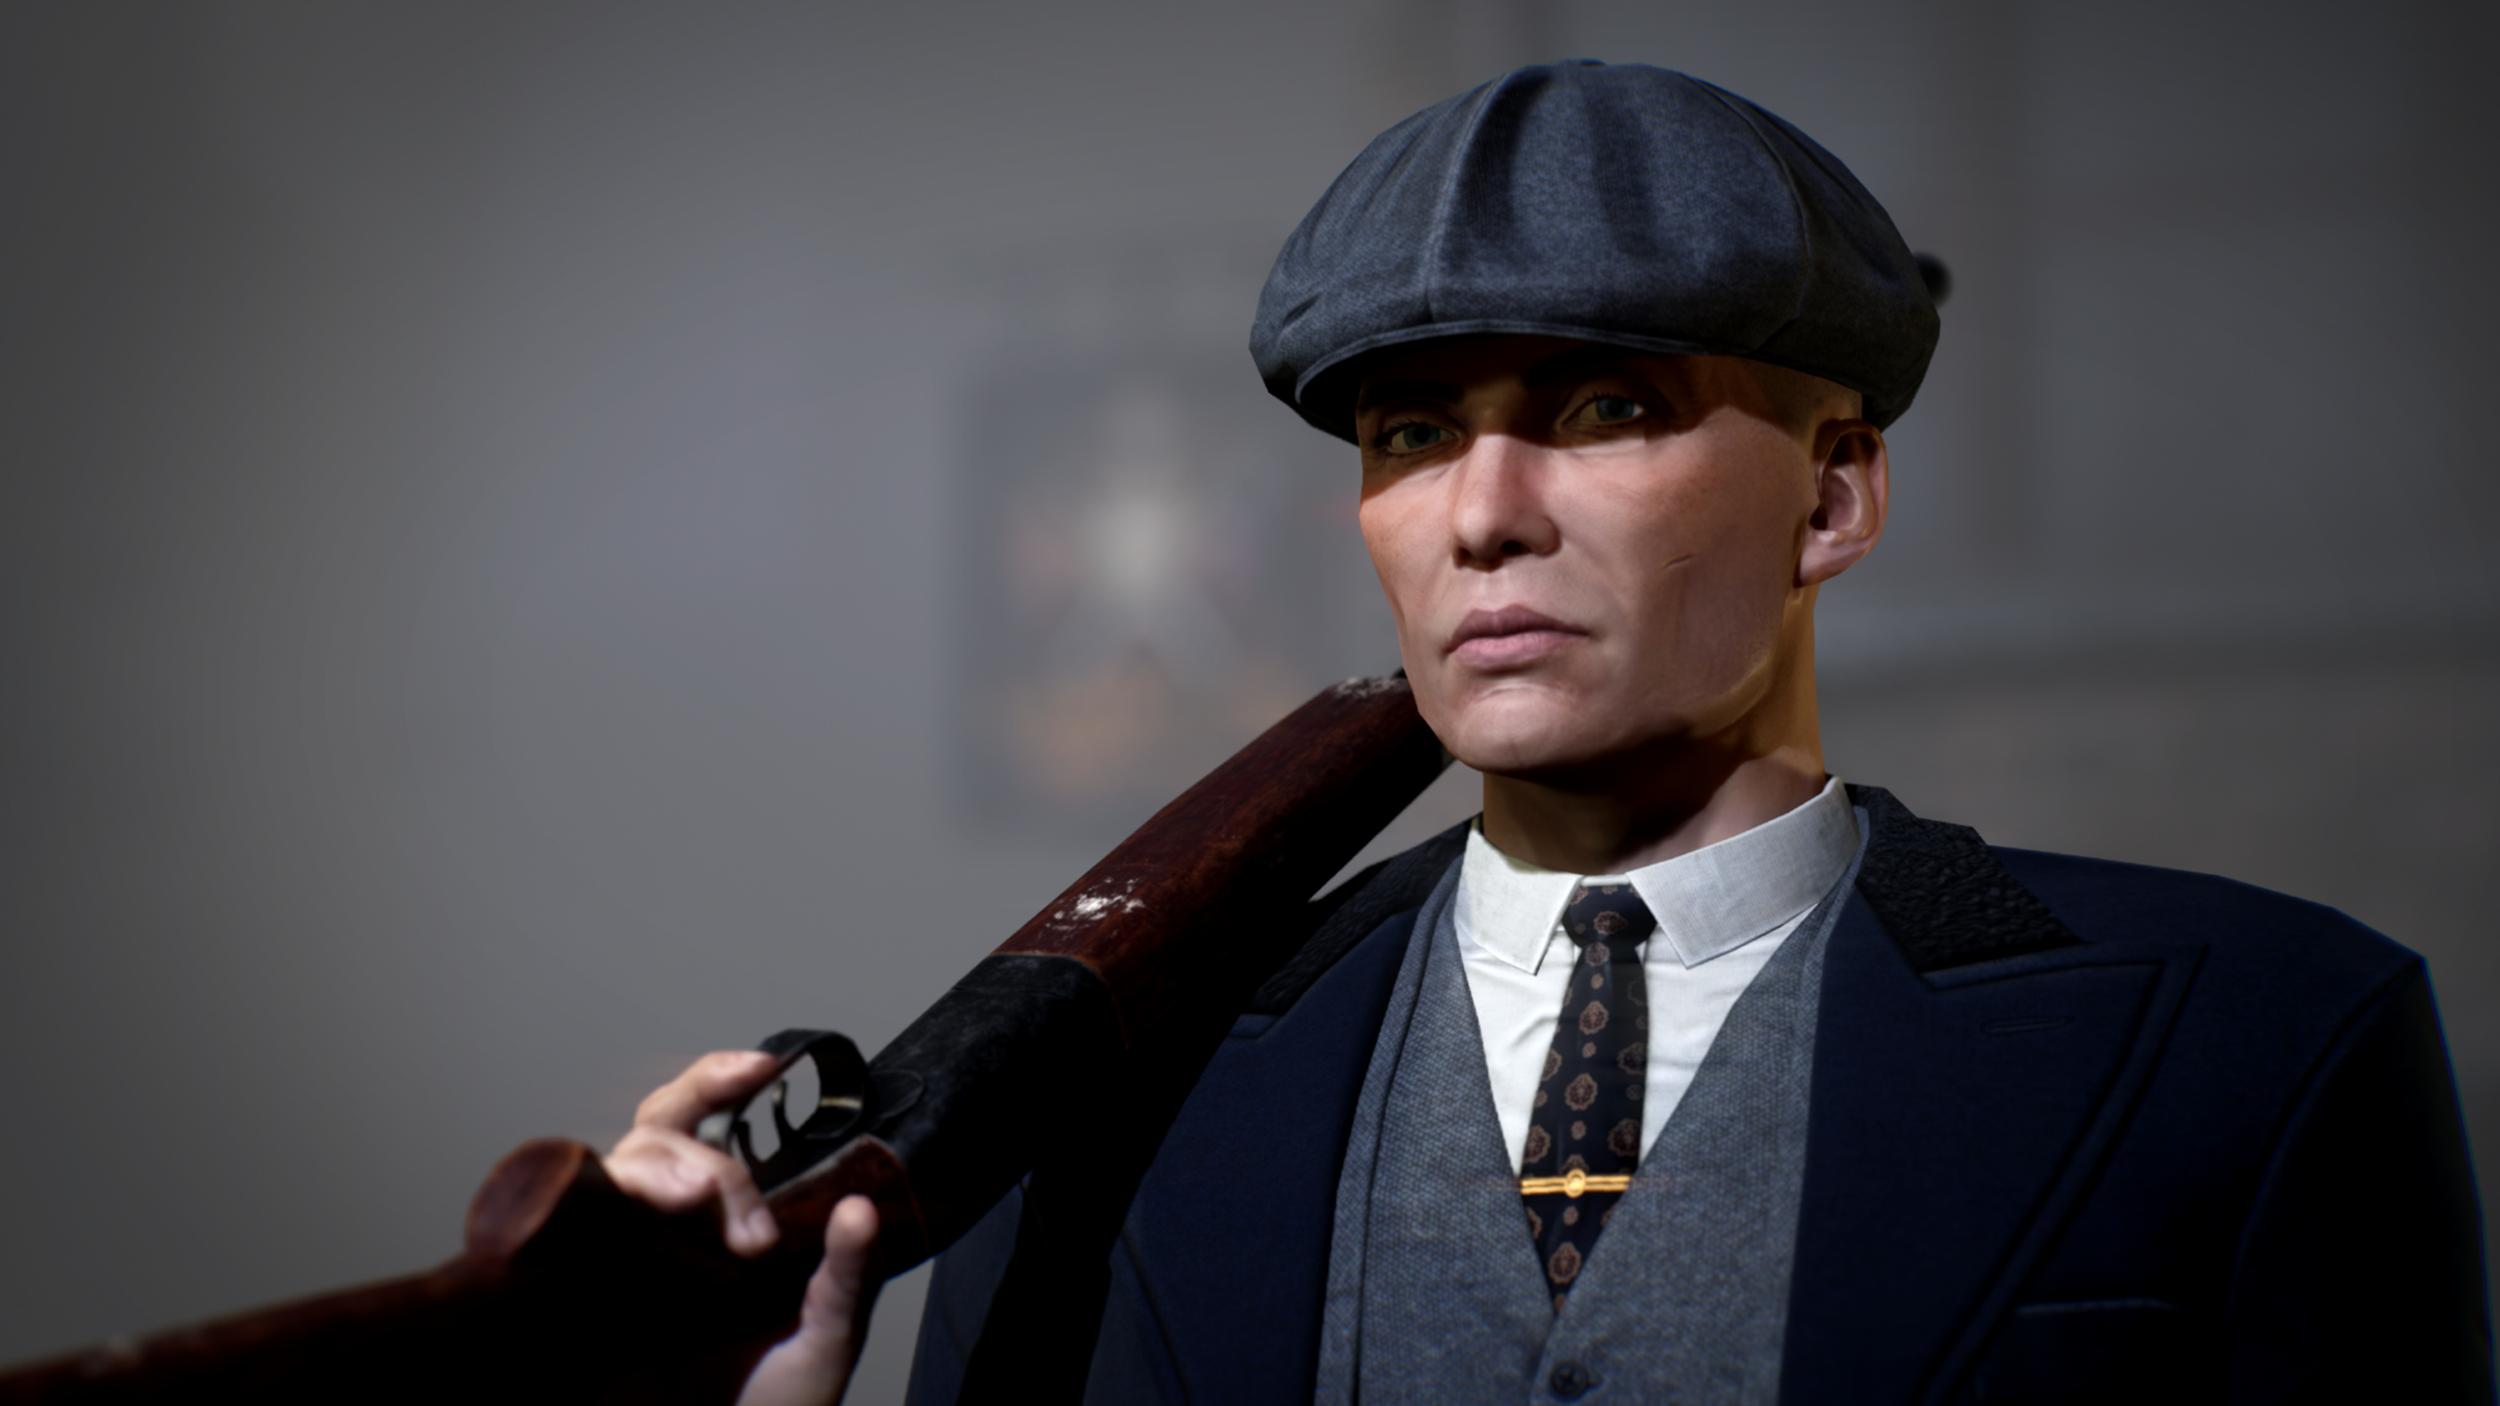 Déguisement Thomas Shelby™ - Peaky Blinders